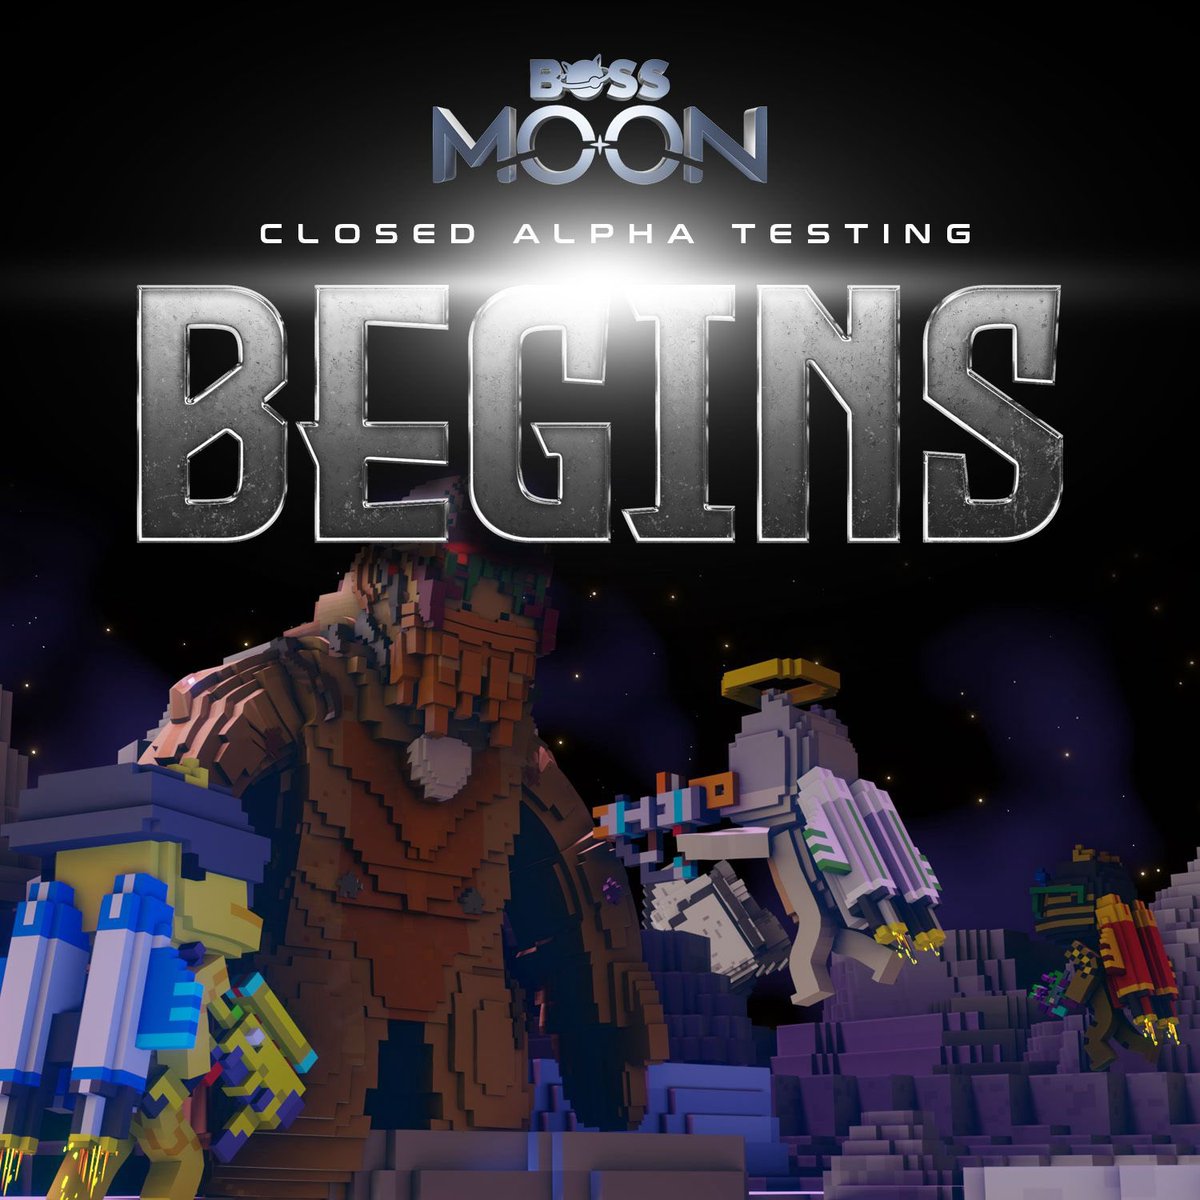 Boss Moon closed alpha testing is live! While this phase of testing is limited to a small group, we aim to open up to more testers soon. Stay tuned! 🔥🚀